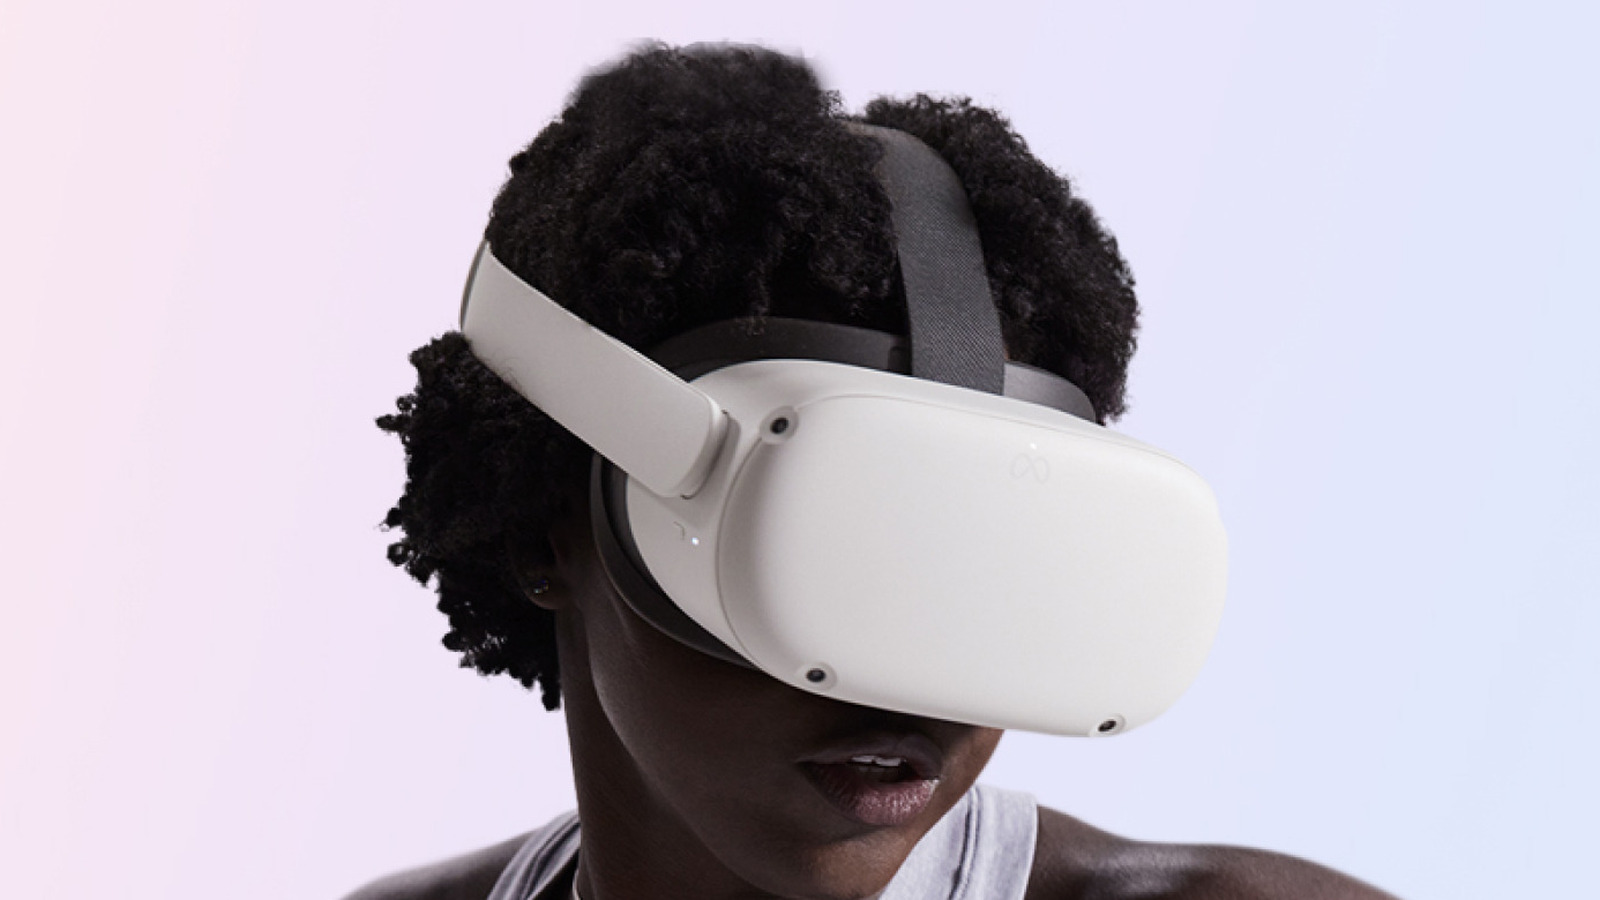 Meta Slashes Quest 2 And Quest Pro VR Headset Prices But Should